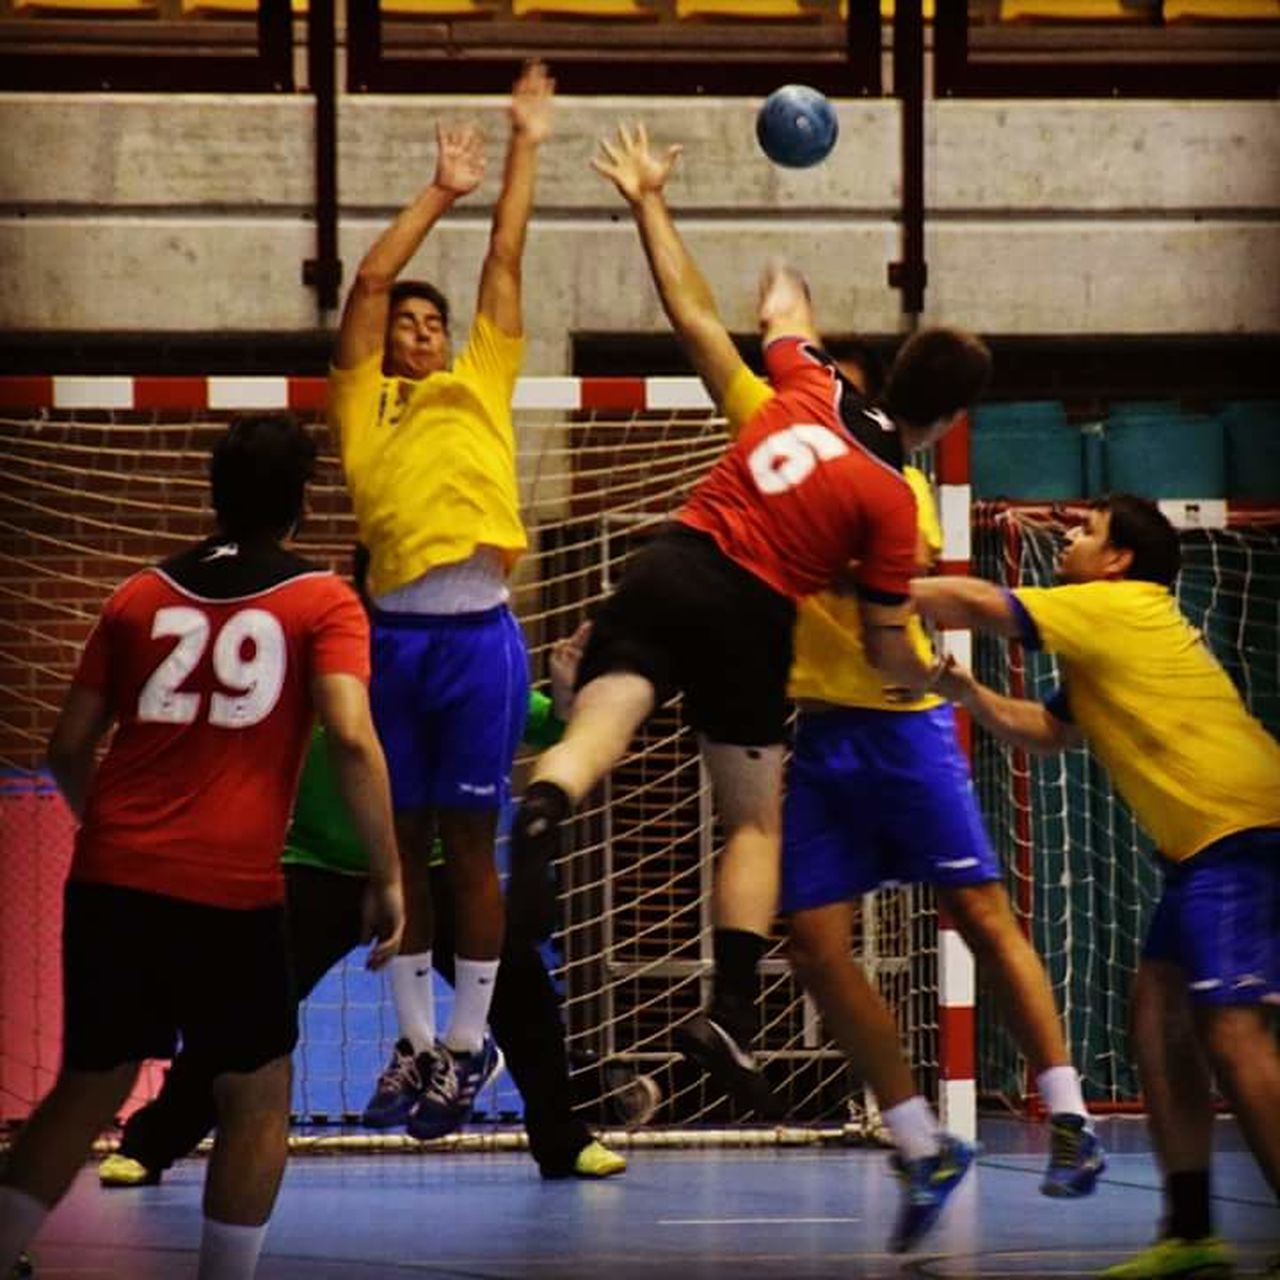 sport, competition, arms raised, basketball - sport, challenge, men, indoors, leisure activity, competitive sport, basketball player, real people, playing, sports uniform, sports team, sportsman, motion, sports clothing, teamwork, athlete, young adult, coordination, day, adult, only men, people, adults only